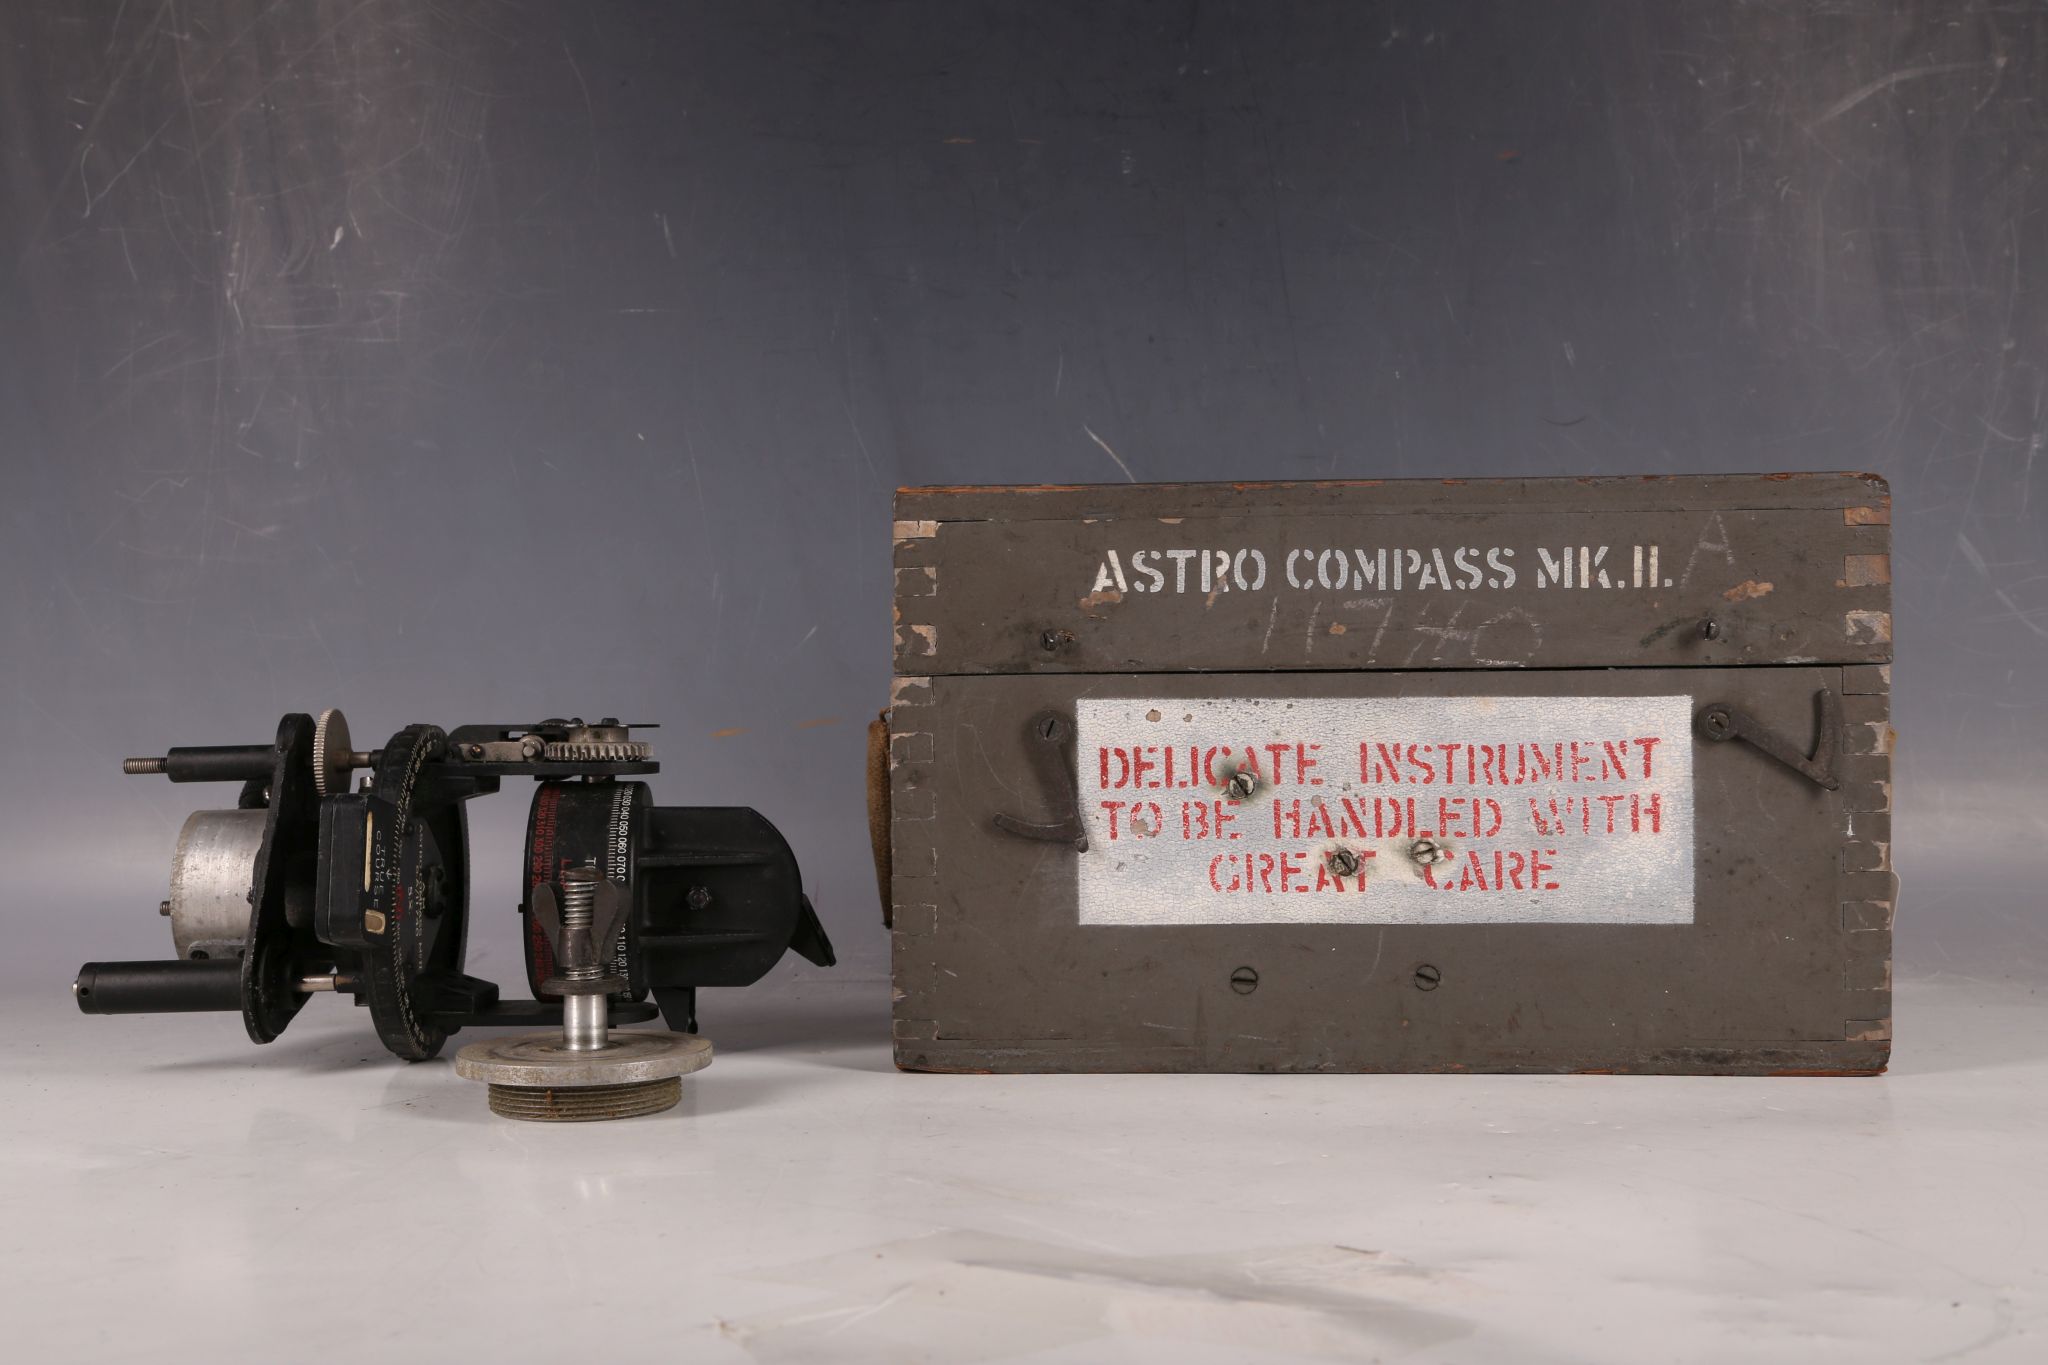 Royal Air Force WW2 Astro Compass MKII, with original carry box, item as used in heavy bombers, inc. - Image 6 of 7